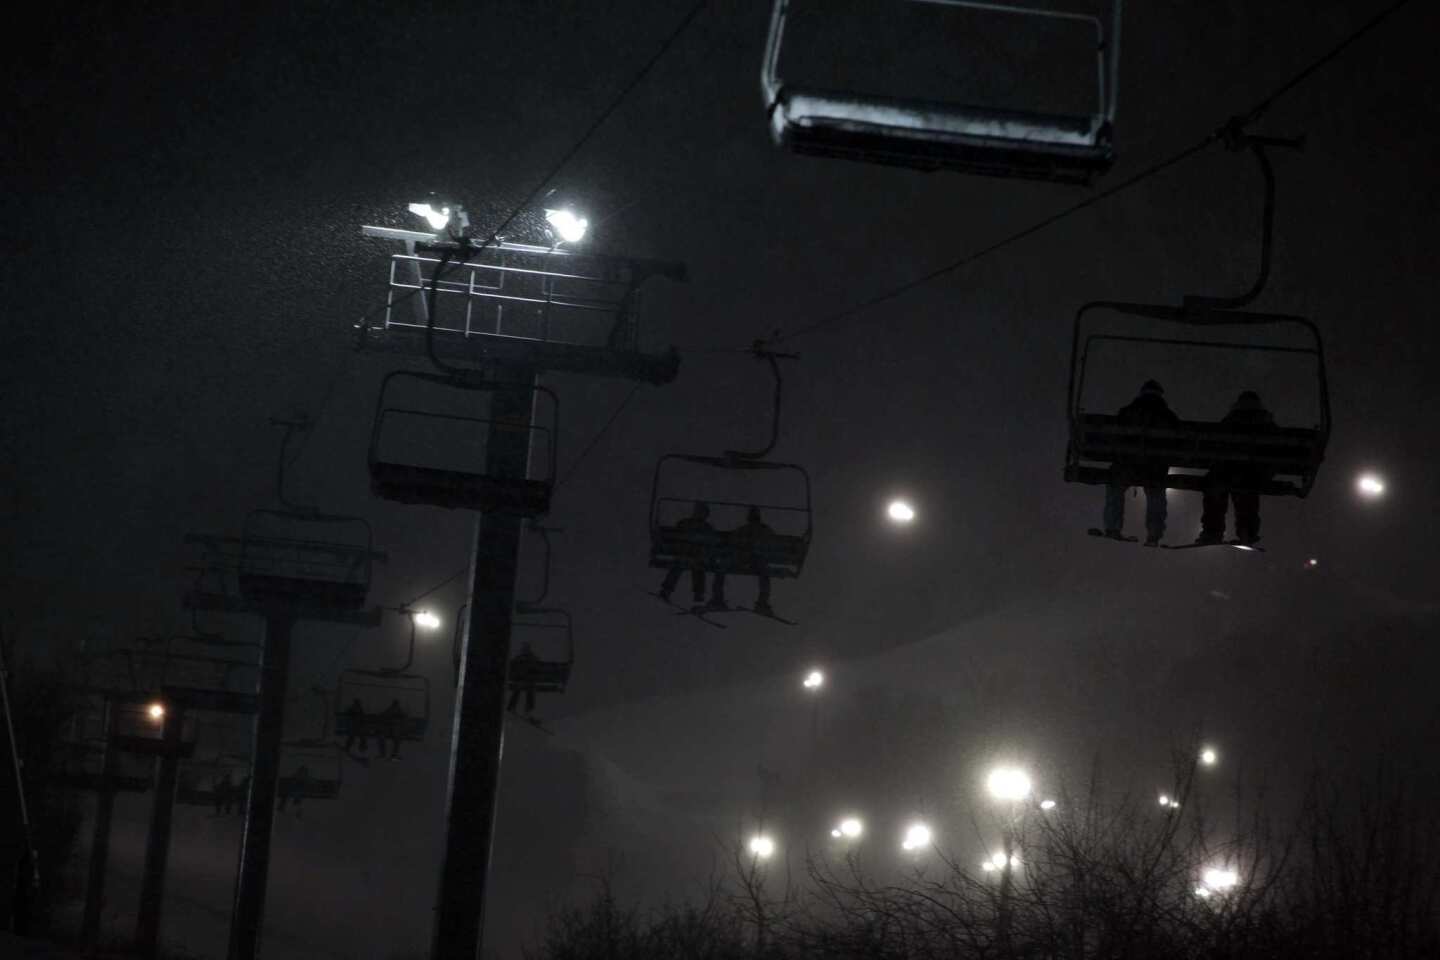 A few passengers ride the lifts during the snow storm.